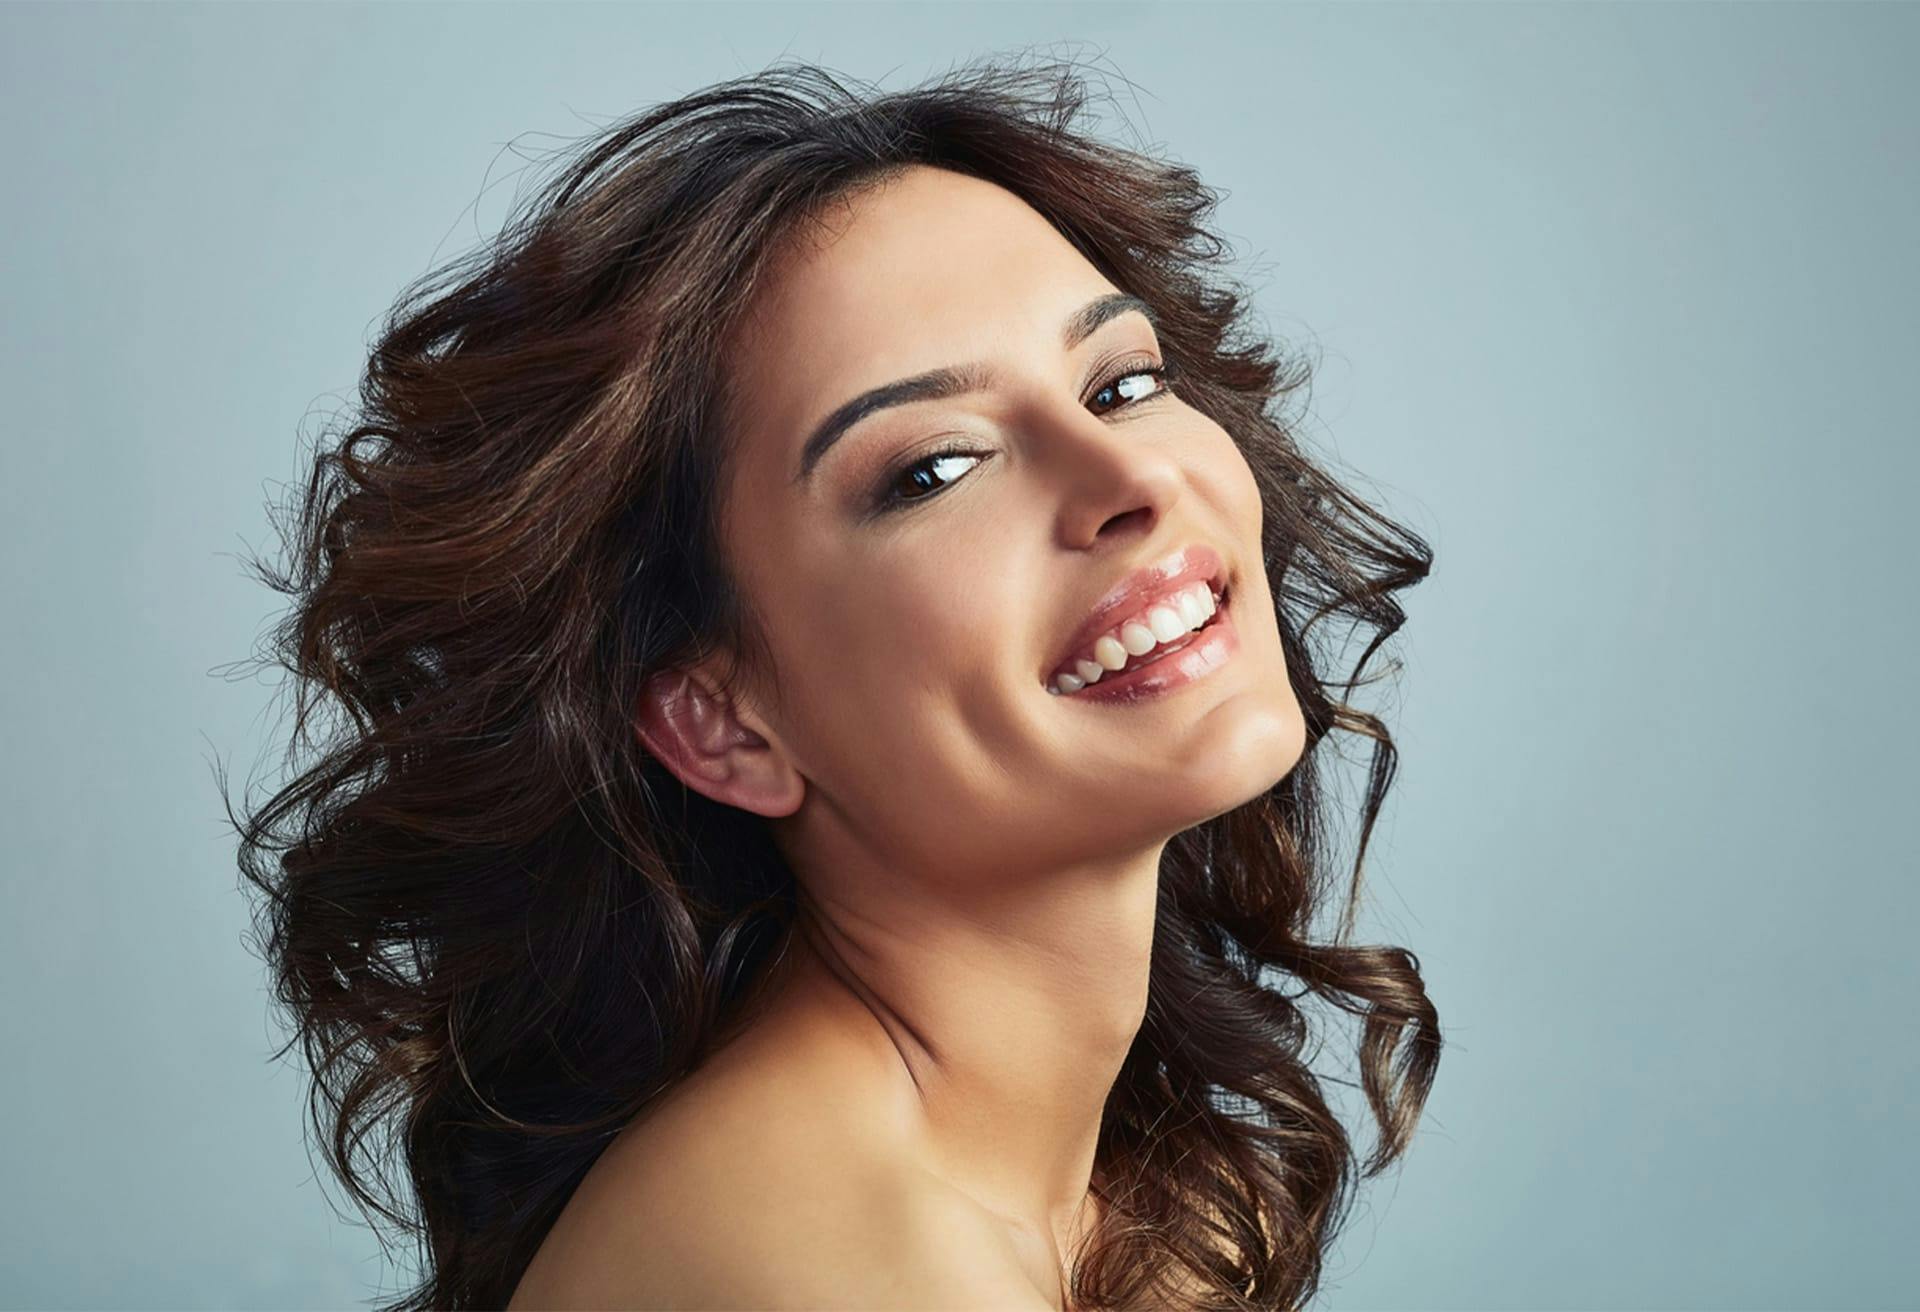 Woman Smiling with Curly Brown Hair